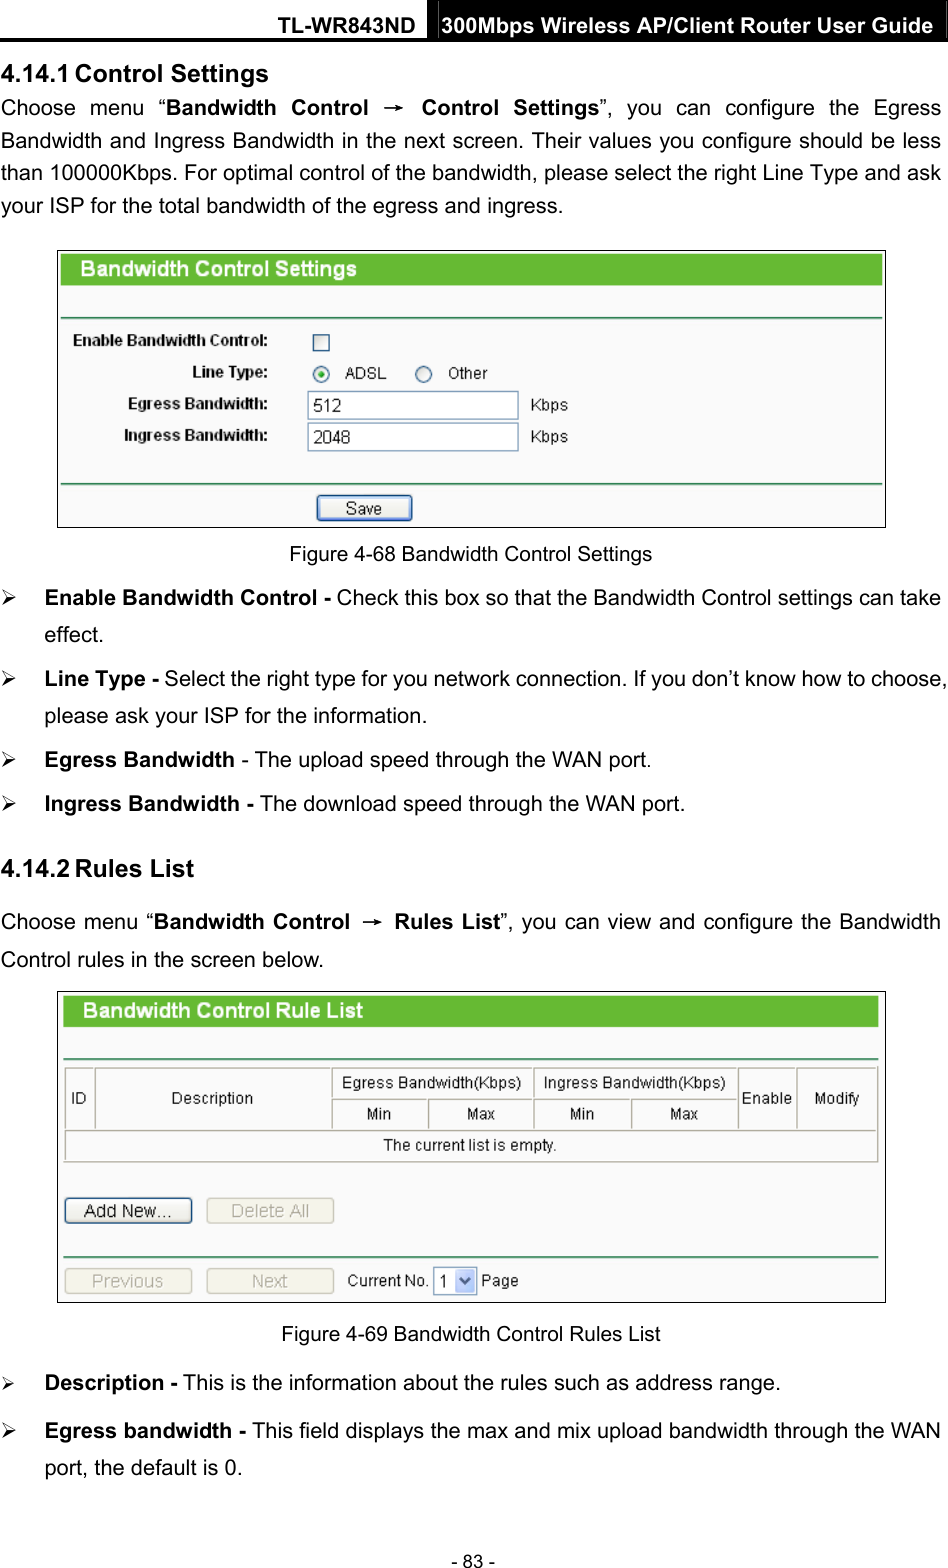 TL-WR843ND 300Mbps Wireless AP/Client Router User Guide - 83 - 4.14.1 Control Settings Choose menu “Bandwidth Control → Control Settings”, you can configure the Egress Bandwidth and Ingress Bandwidth in the next screen. Their values you configure should be less than 100000Kbps. For optimal control of the bandwidth, please select the right Line Type and ask your ISP for the total bandwidth of the egress and ingress.  Figure 4-68 Bandwidth Control Settings  Enable Bandwidth Control - Check this box so that the Bandwidth Control settings can take effect.  Line Type - Select the right type for you network connection. If you don’t know how to choose, please ask your ISP for the information.  Egress Bandwidth - The upload speed through the WAN port.  Ingress Bandwidth - The download speed through the WAN port. 4.14.2 Rules List Choose menu “Bandwidth Control → Rules List”, you can view and configure the Bandwidth Control rules in the screen below.  Figure 4-69 Bandwidth Control Rules List  Description - This is the information about the rules such as address range.  Egress bandwidth - This field displays the max and mix upload bandwidth through the WAN port, the default is 0. 